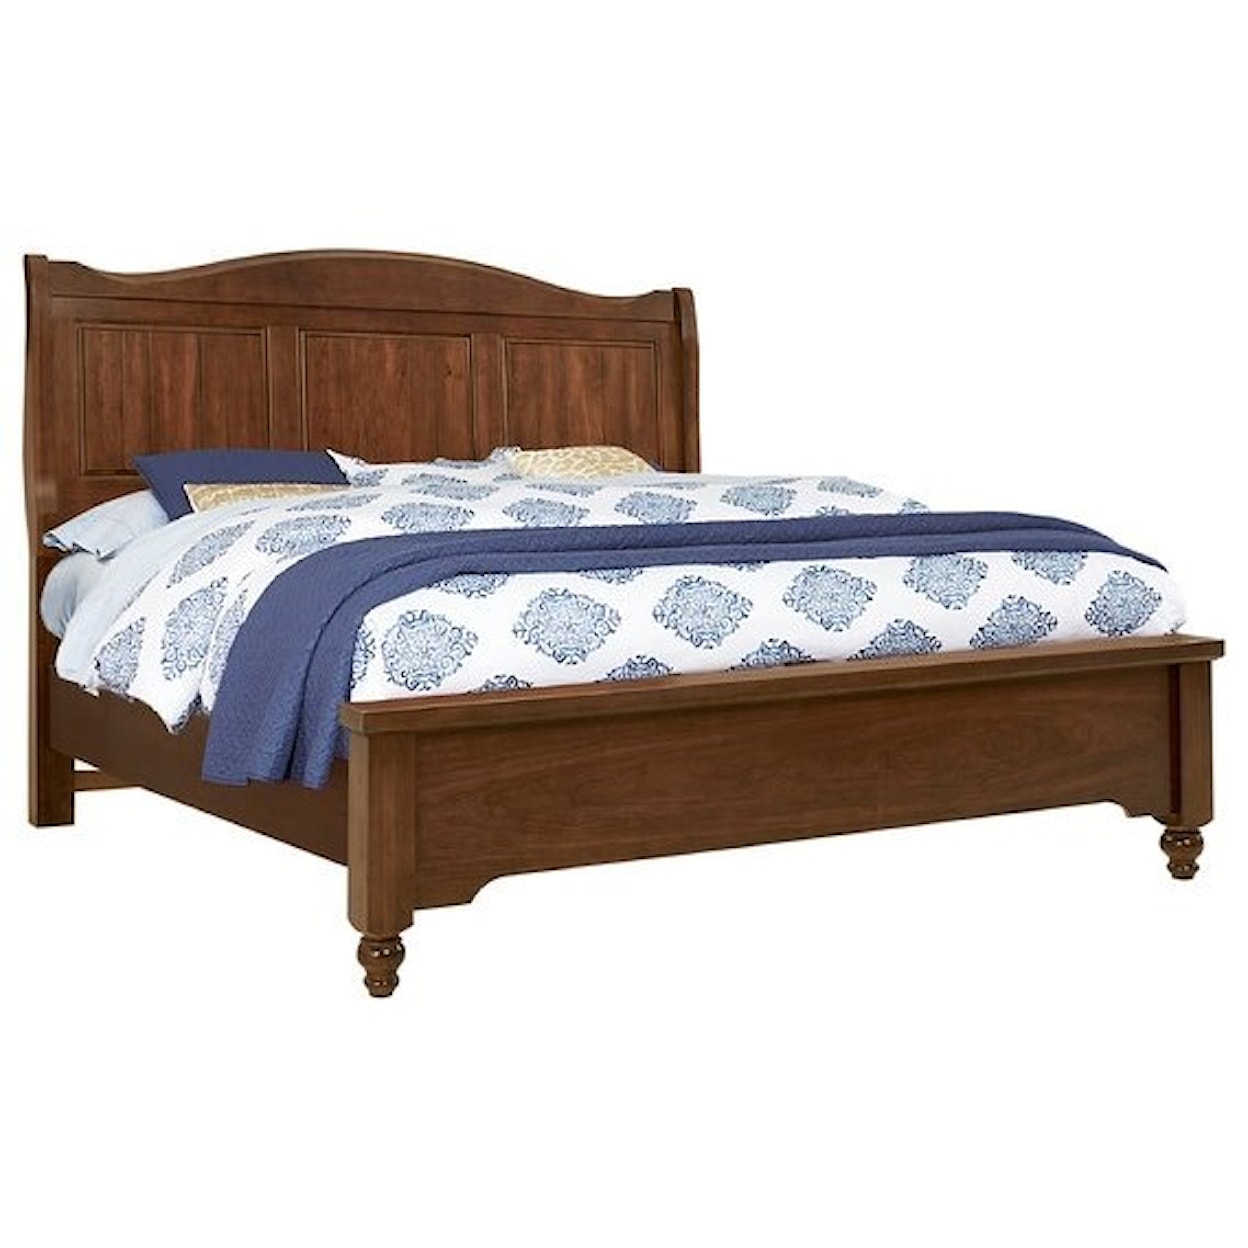 Virginia House Heritage California King Low Profile Bed